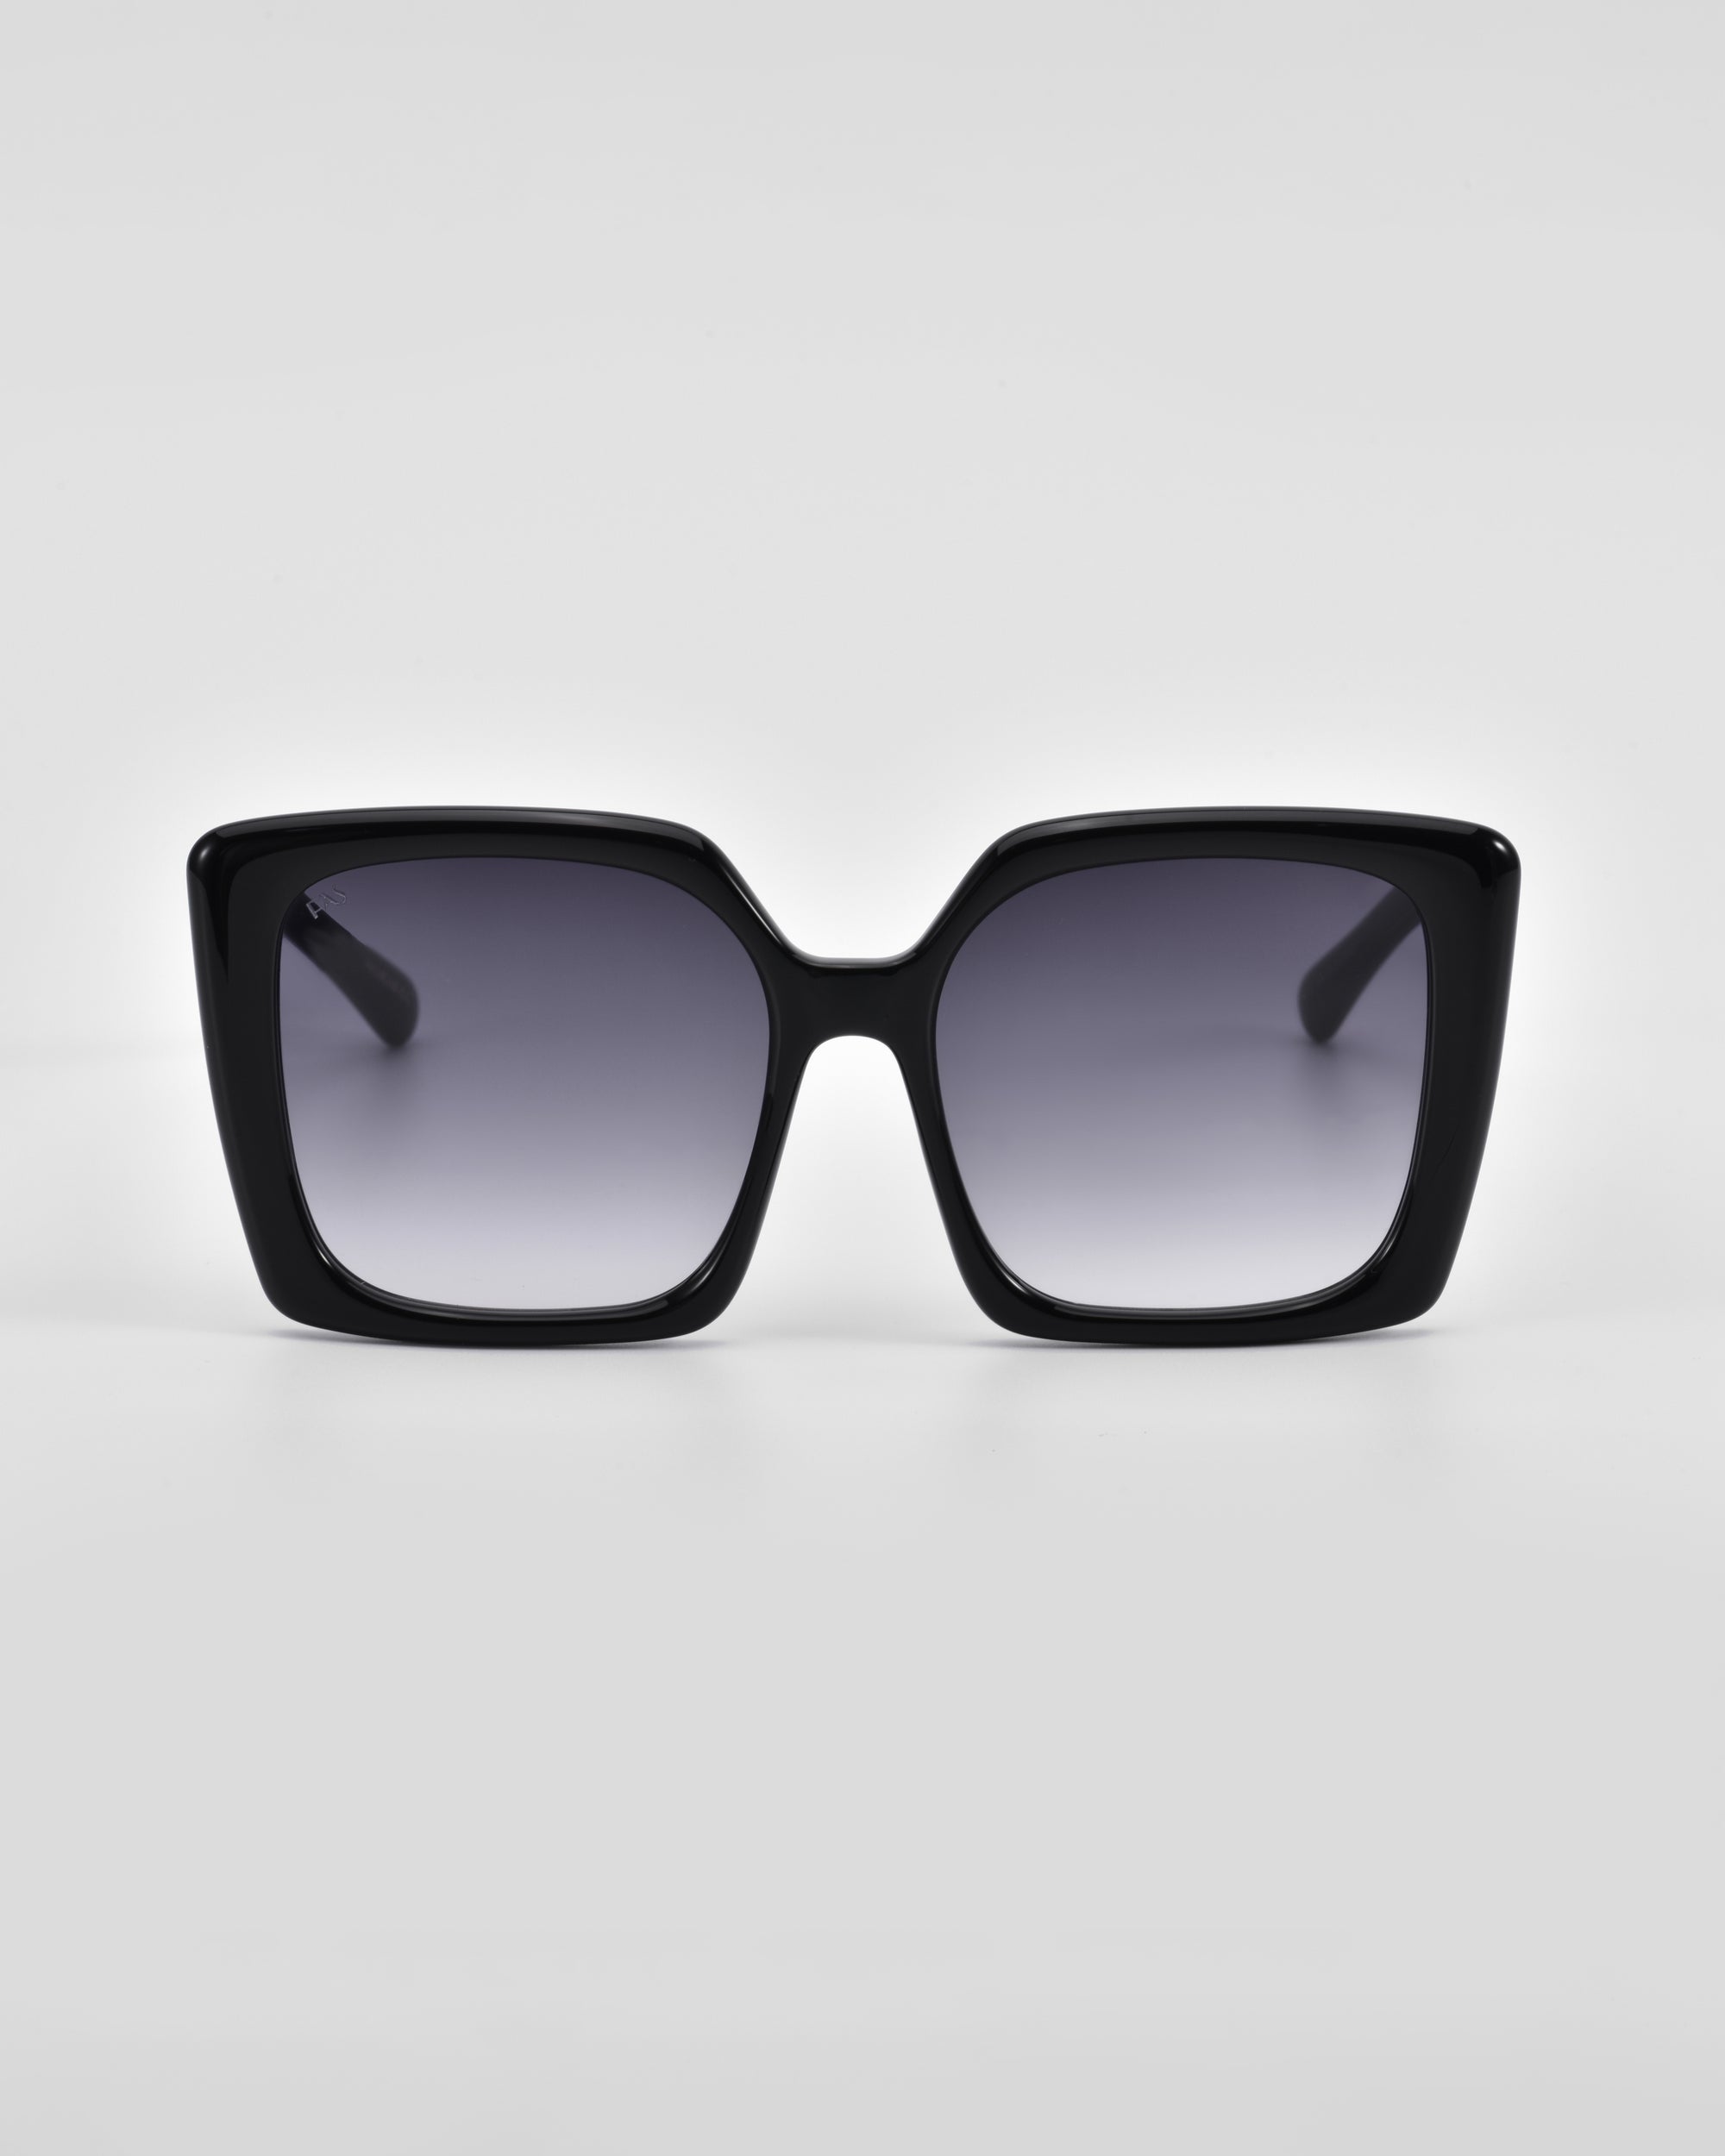 A pair of black oversized square Eos sunglasses with dark tinted lenses and classic temple round details by For Art's Sake®. The glasses are facing forward, showcasing the full frame and lens design against a plain white background.